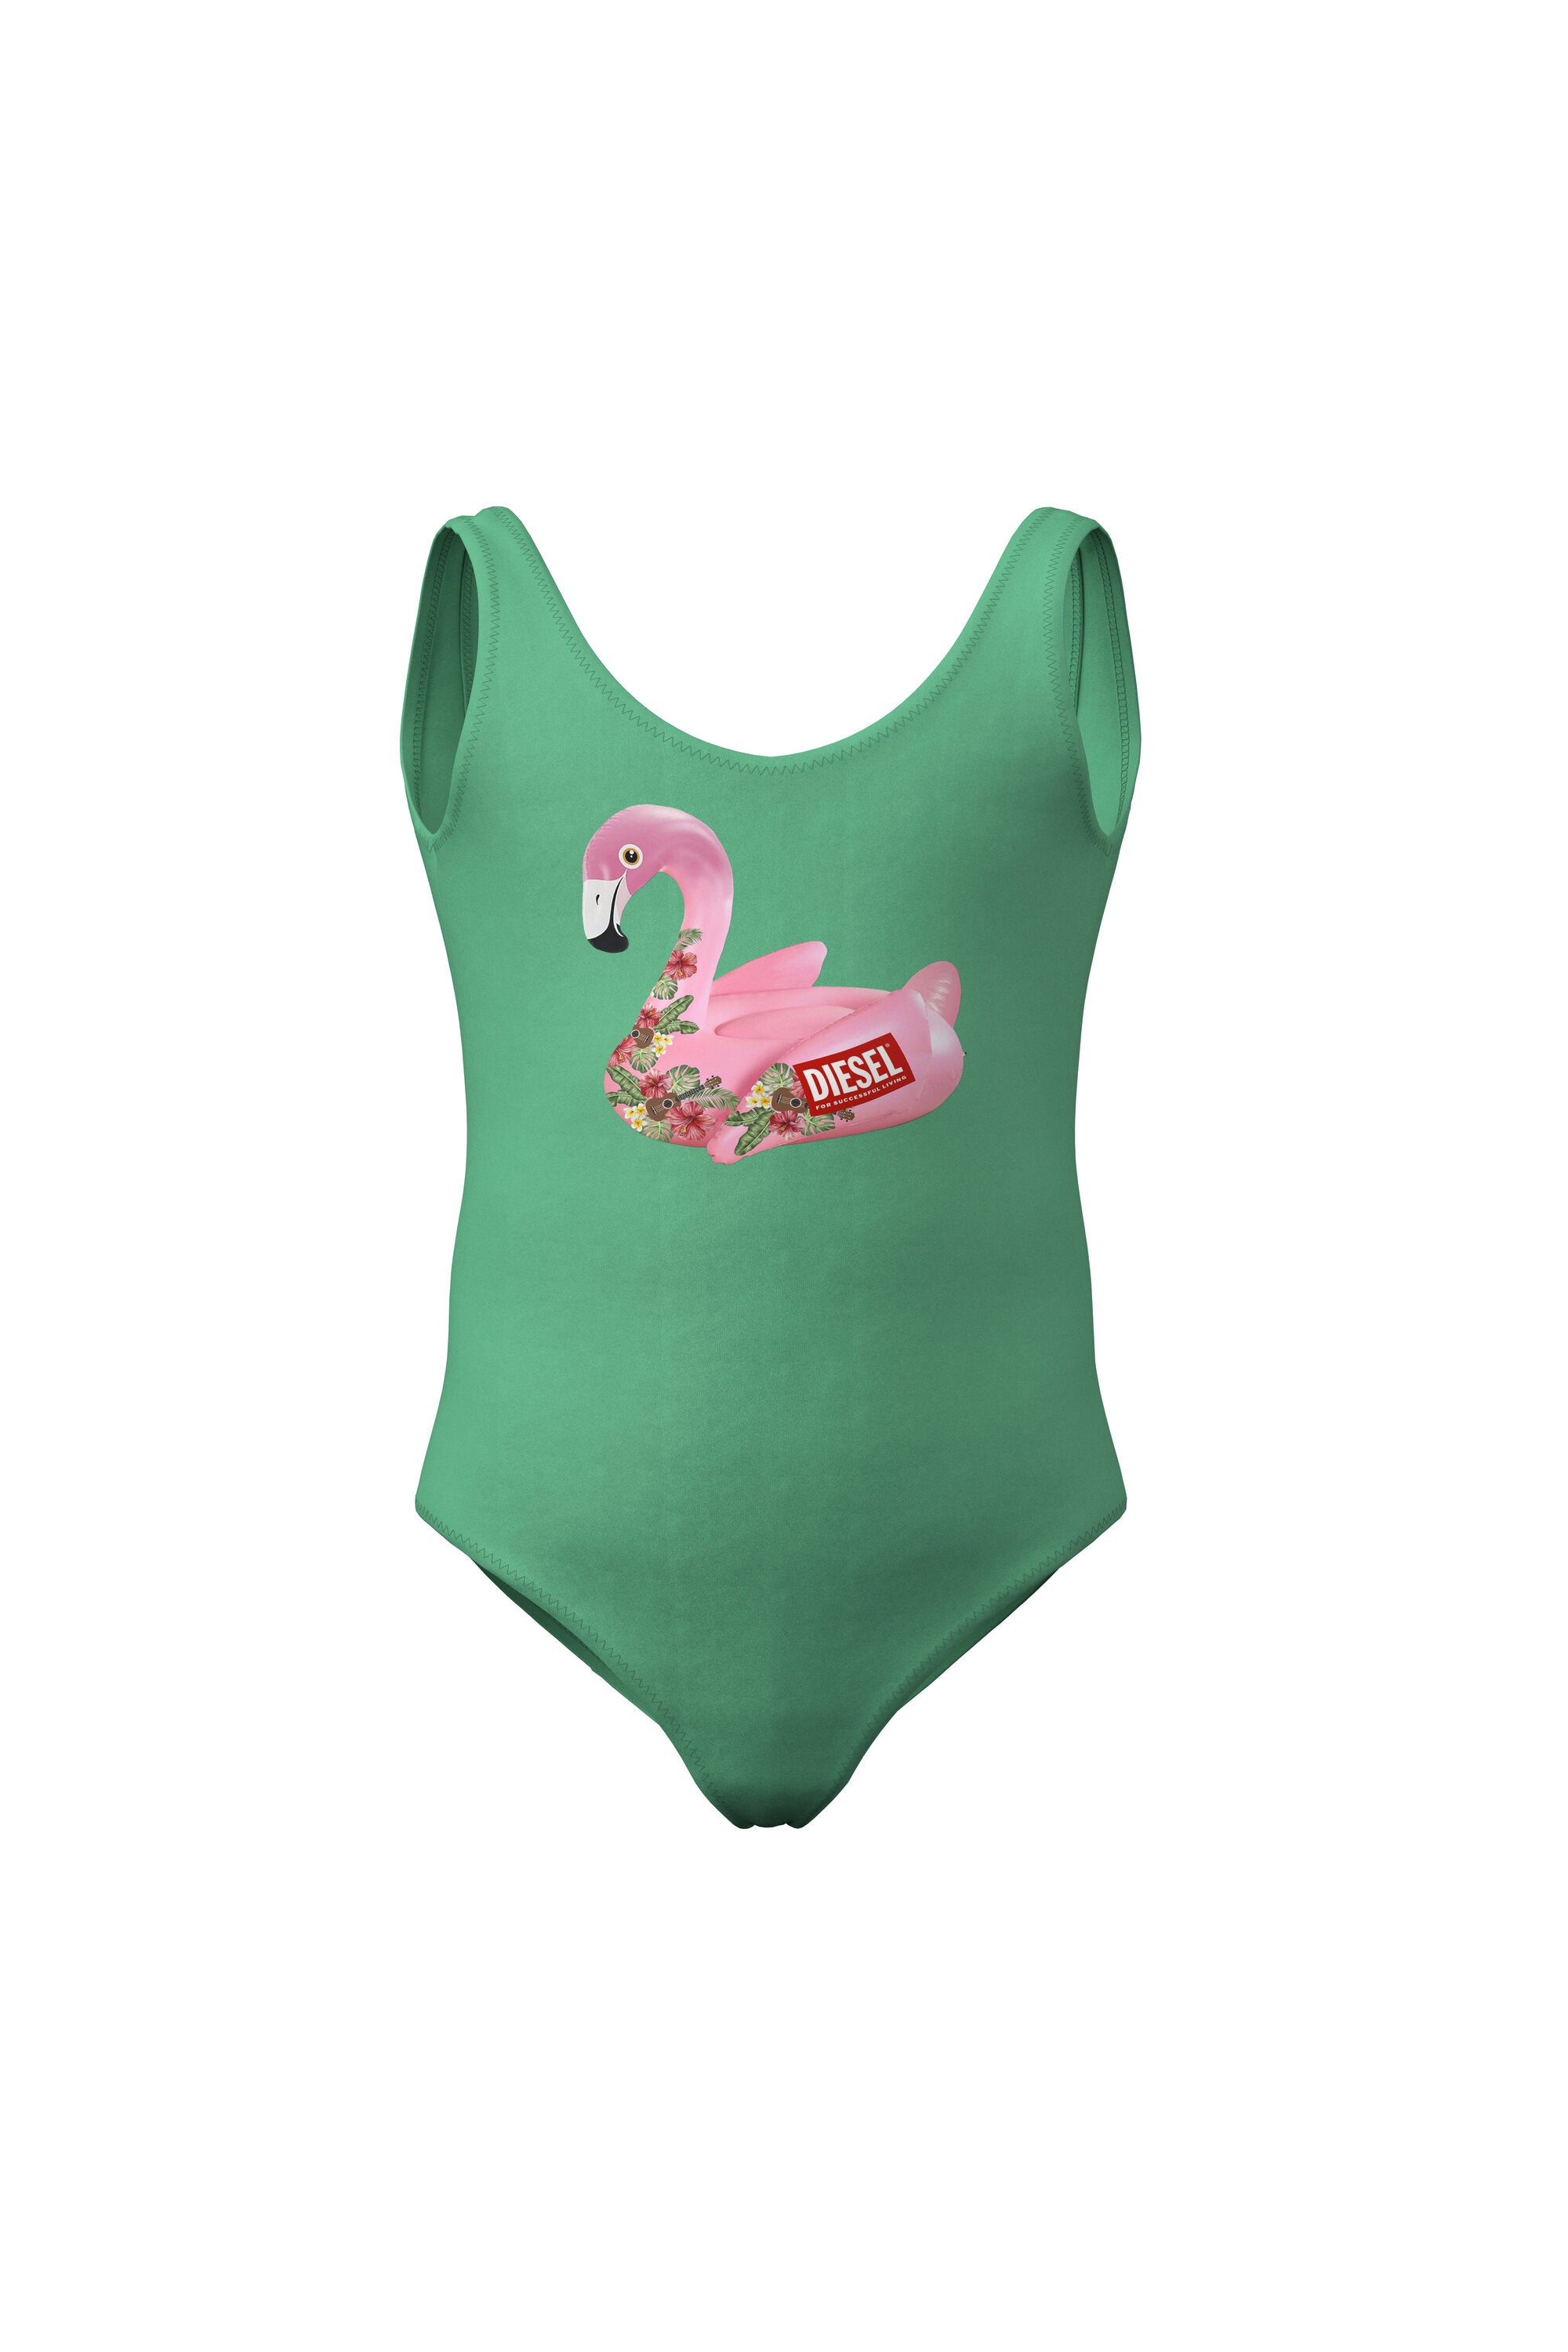 Green lycra one-piece swimsuit with pink flamingo print